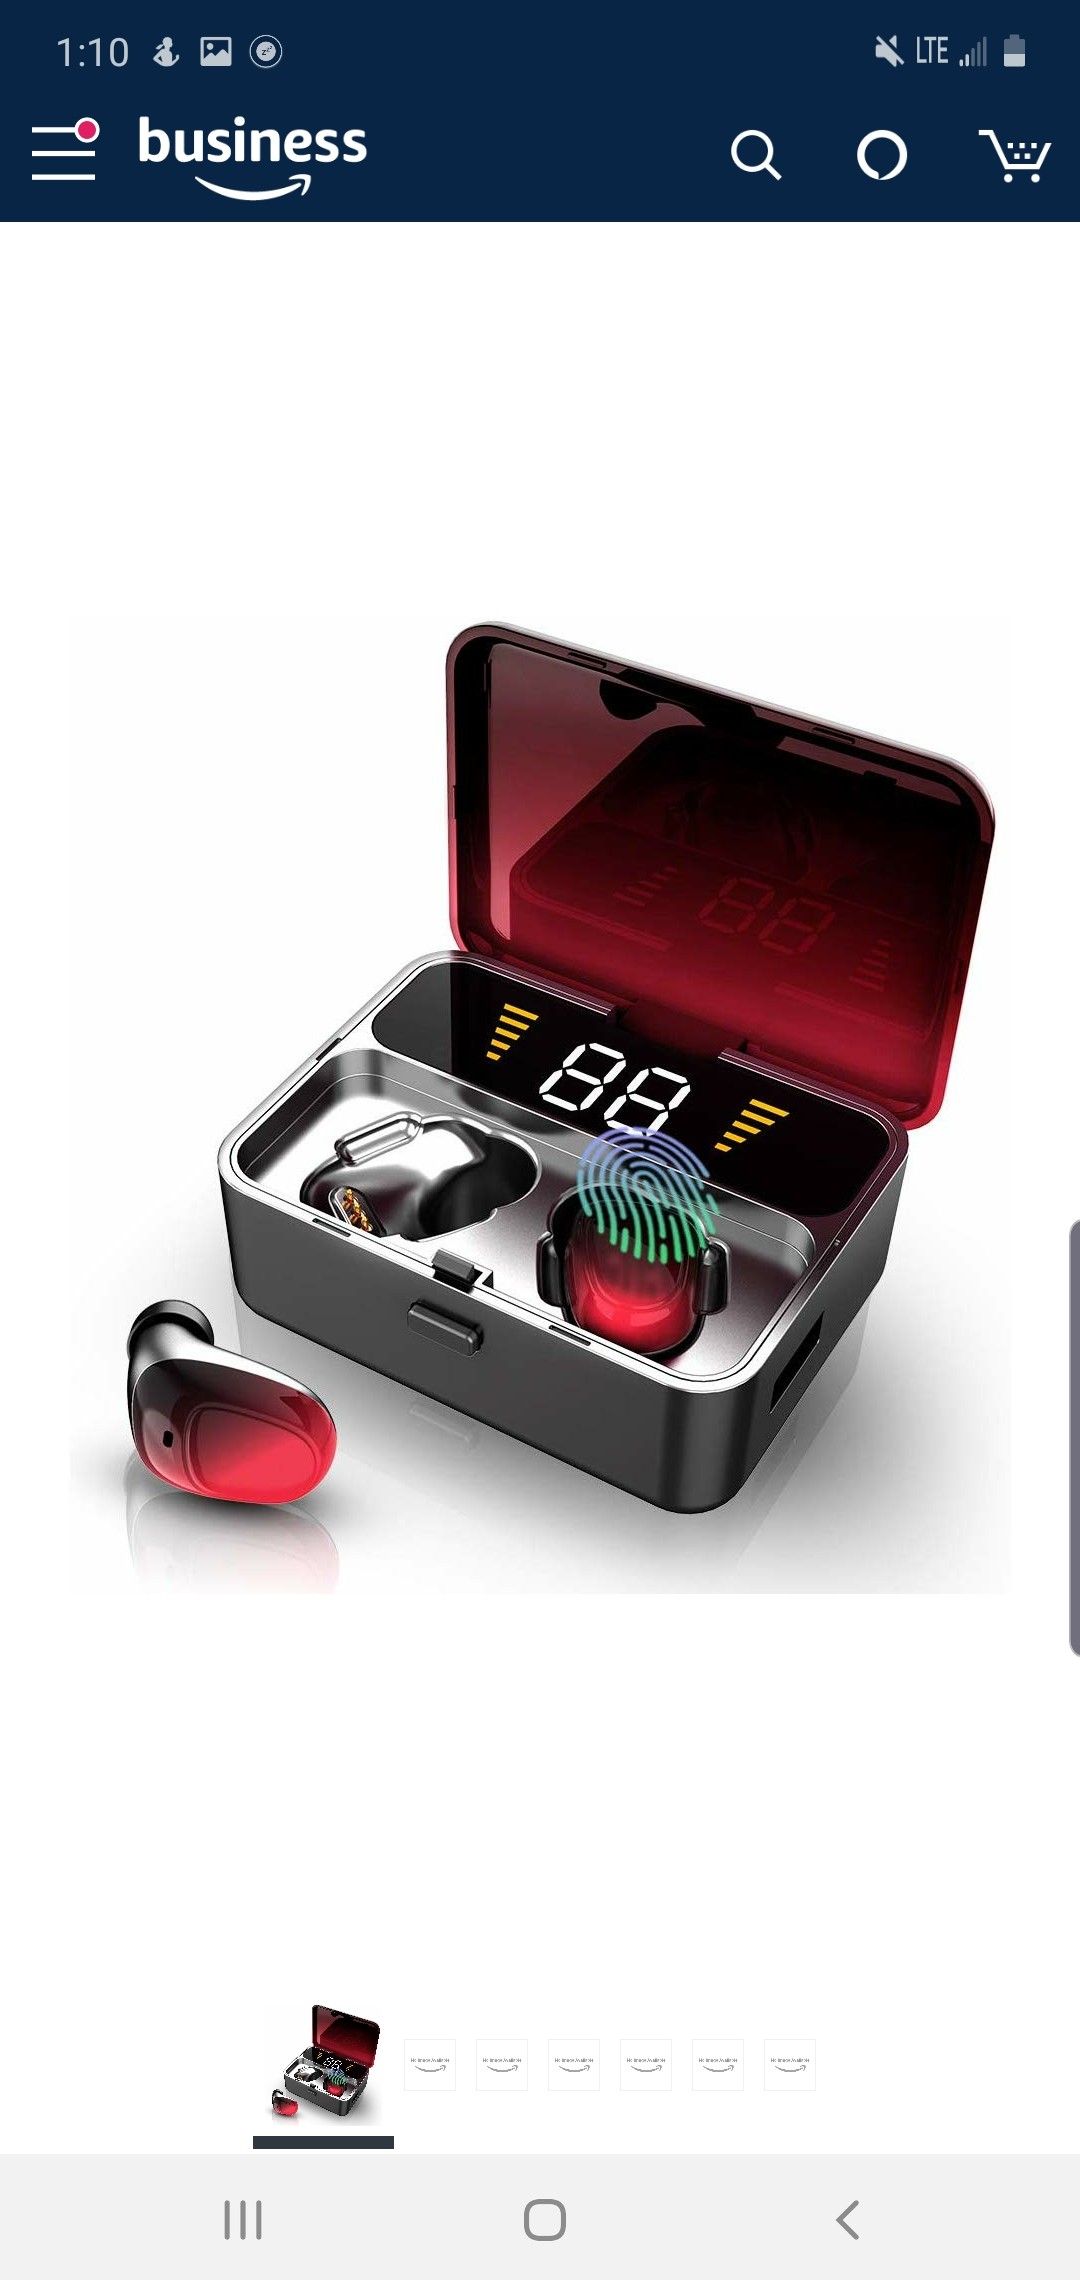 Bluetooth Earbuds with 2000mAh Charging Case NEW IN BOX 1/2 PRICE